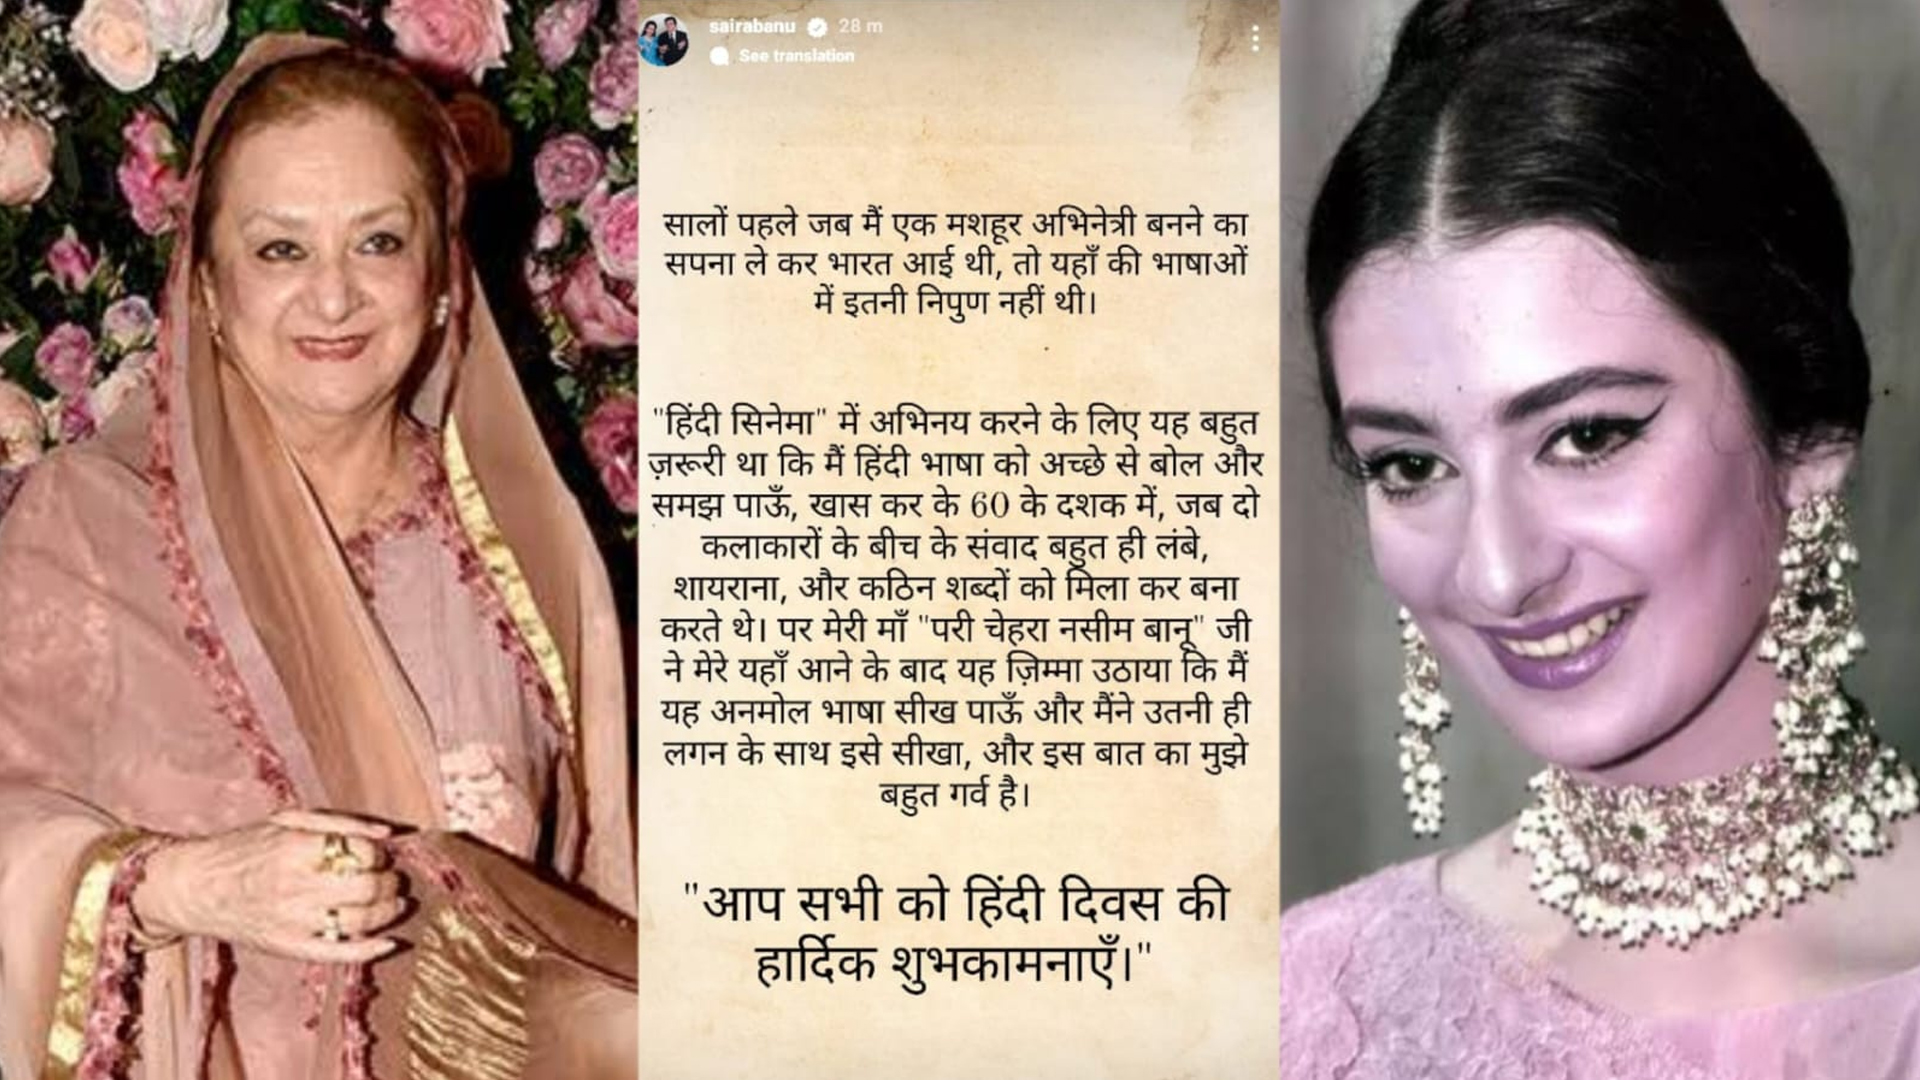 On the occasion of Hindi Diwas, veteran actress @sairabanu took to instagram to talk about her first experiences with Hindi. The actress spoke about her motivation and drive to learn one of our Official languages, and how proud she was to learn it.